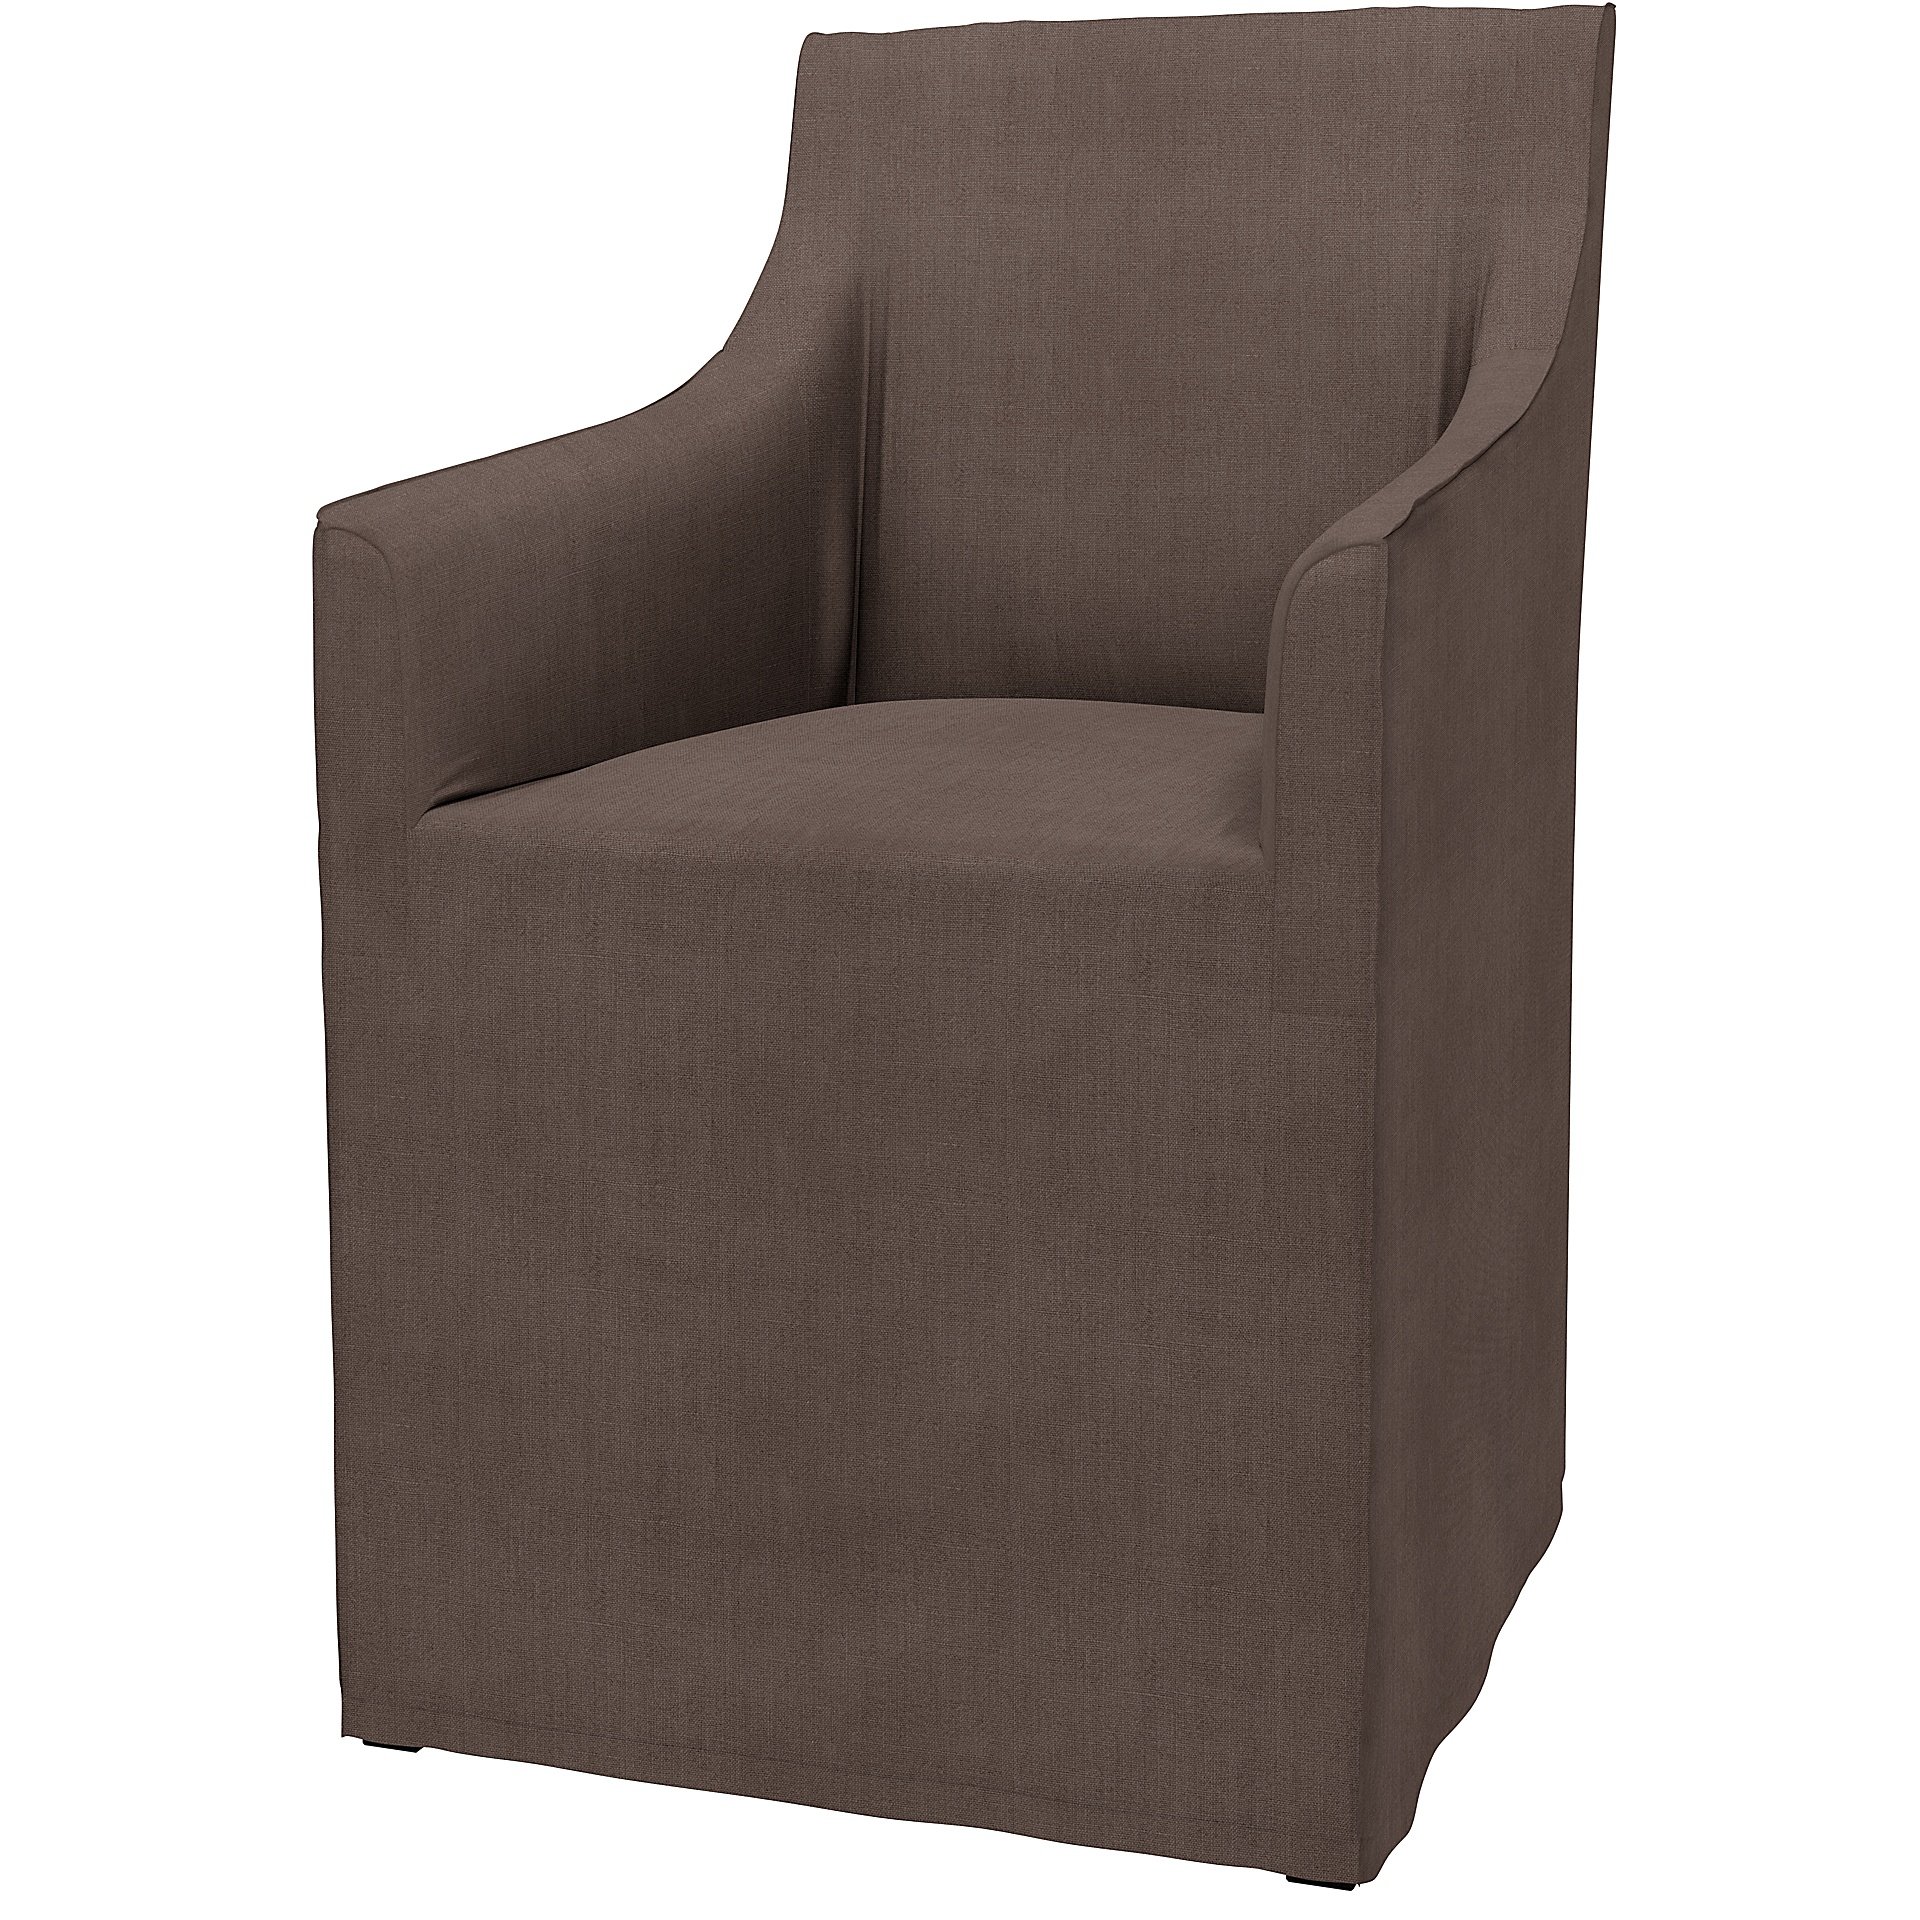 IKEA - Sakarias Chair with Armrests Cover, Cocoa, Linen - Bemz